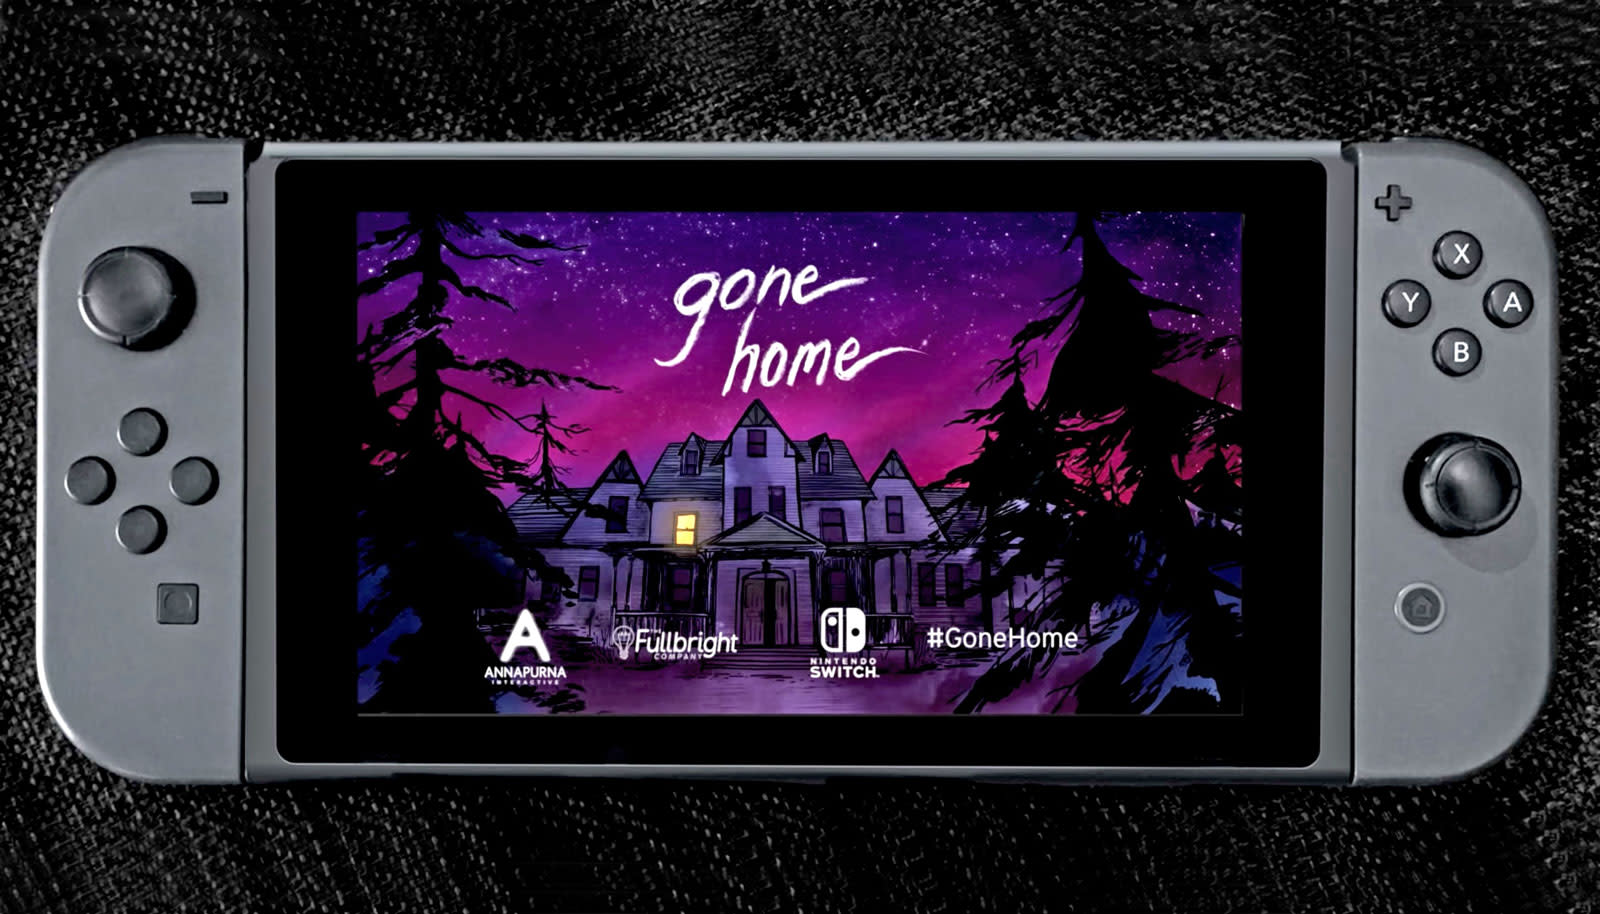 Going home игра. Gone Home игра ps4. Nintendo Switch дом. Gone Home - Console Edition. Fullbright (Company) игры.